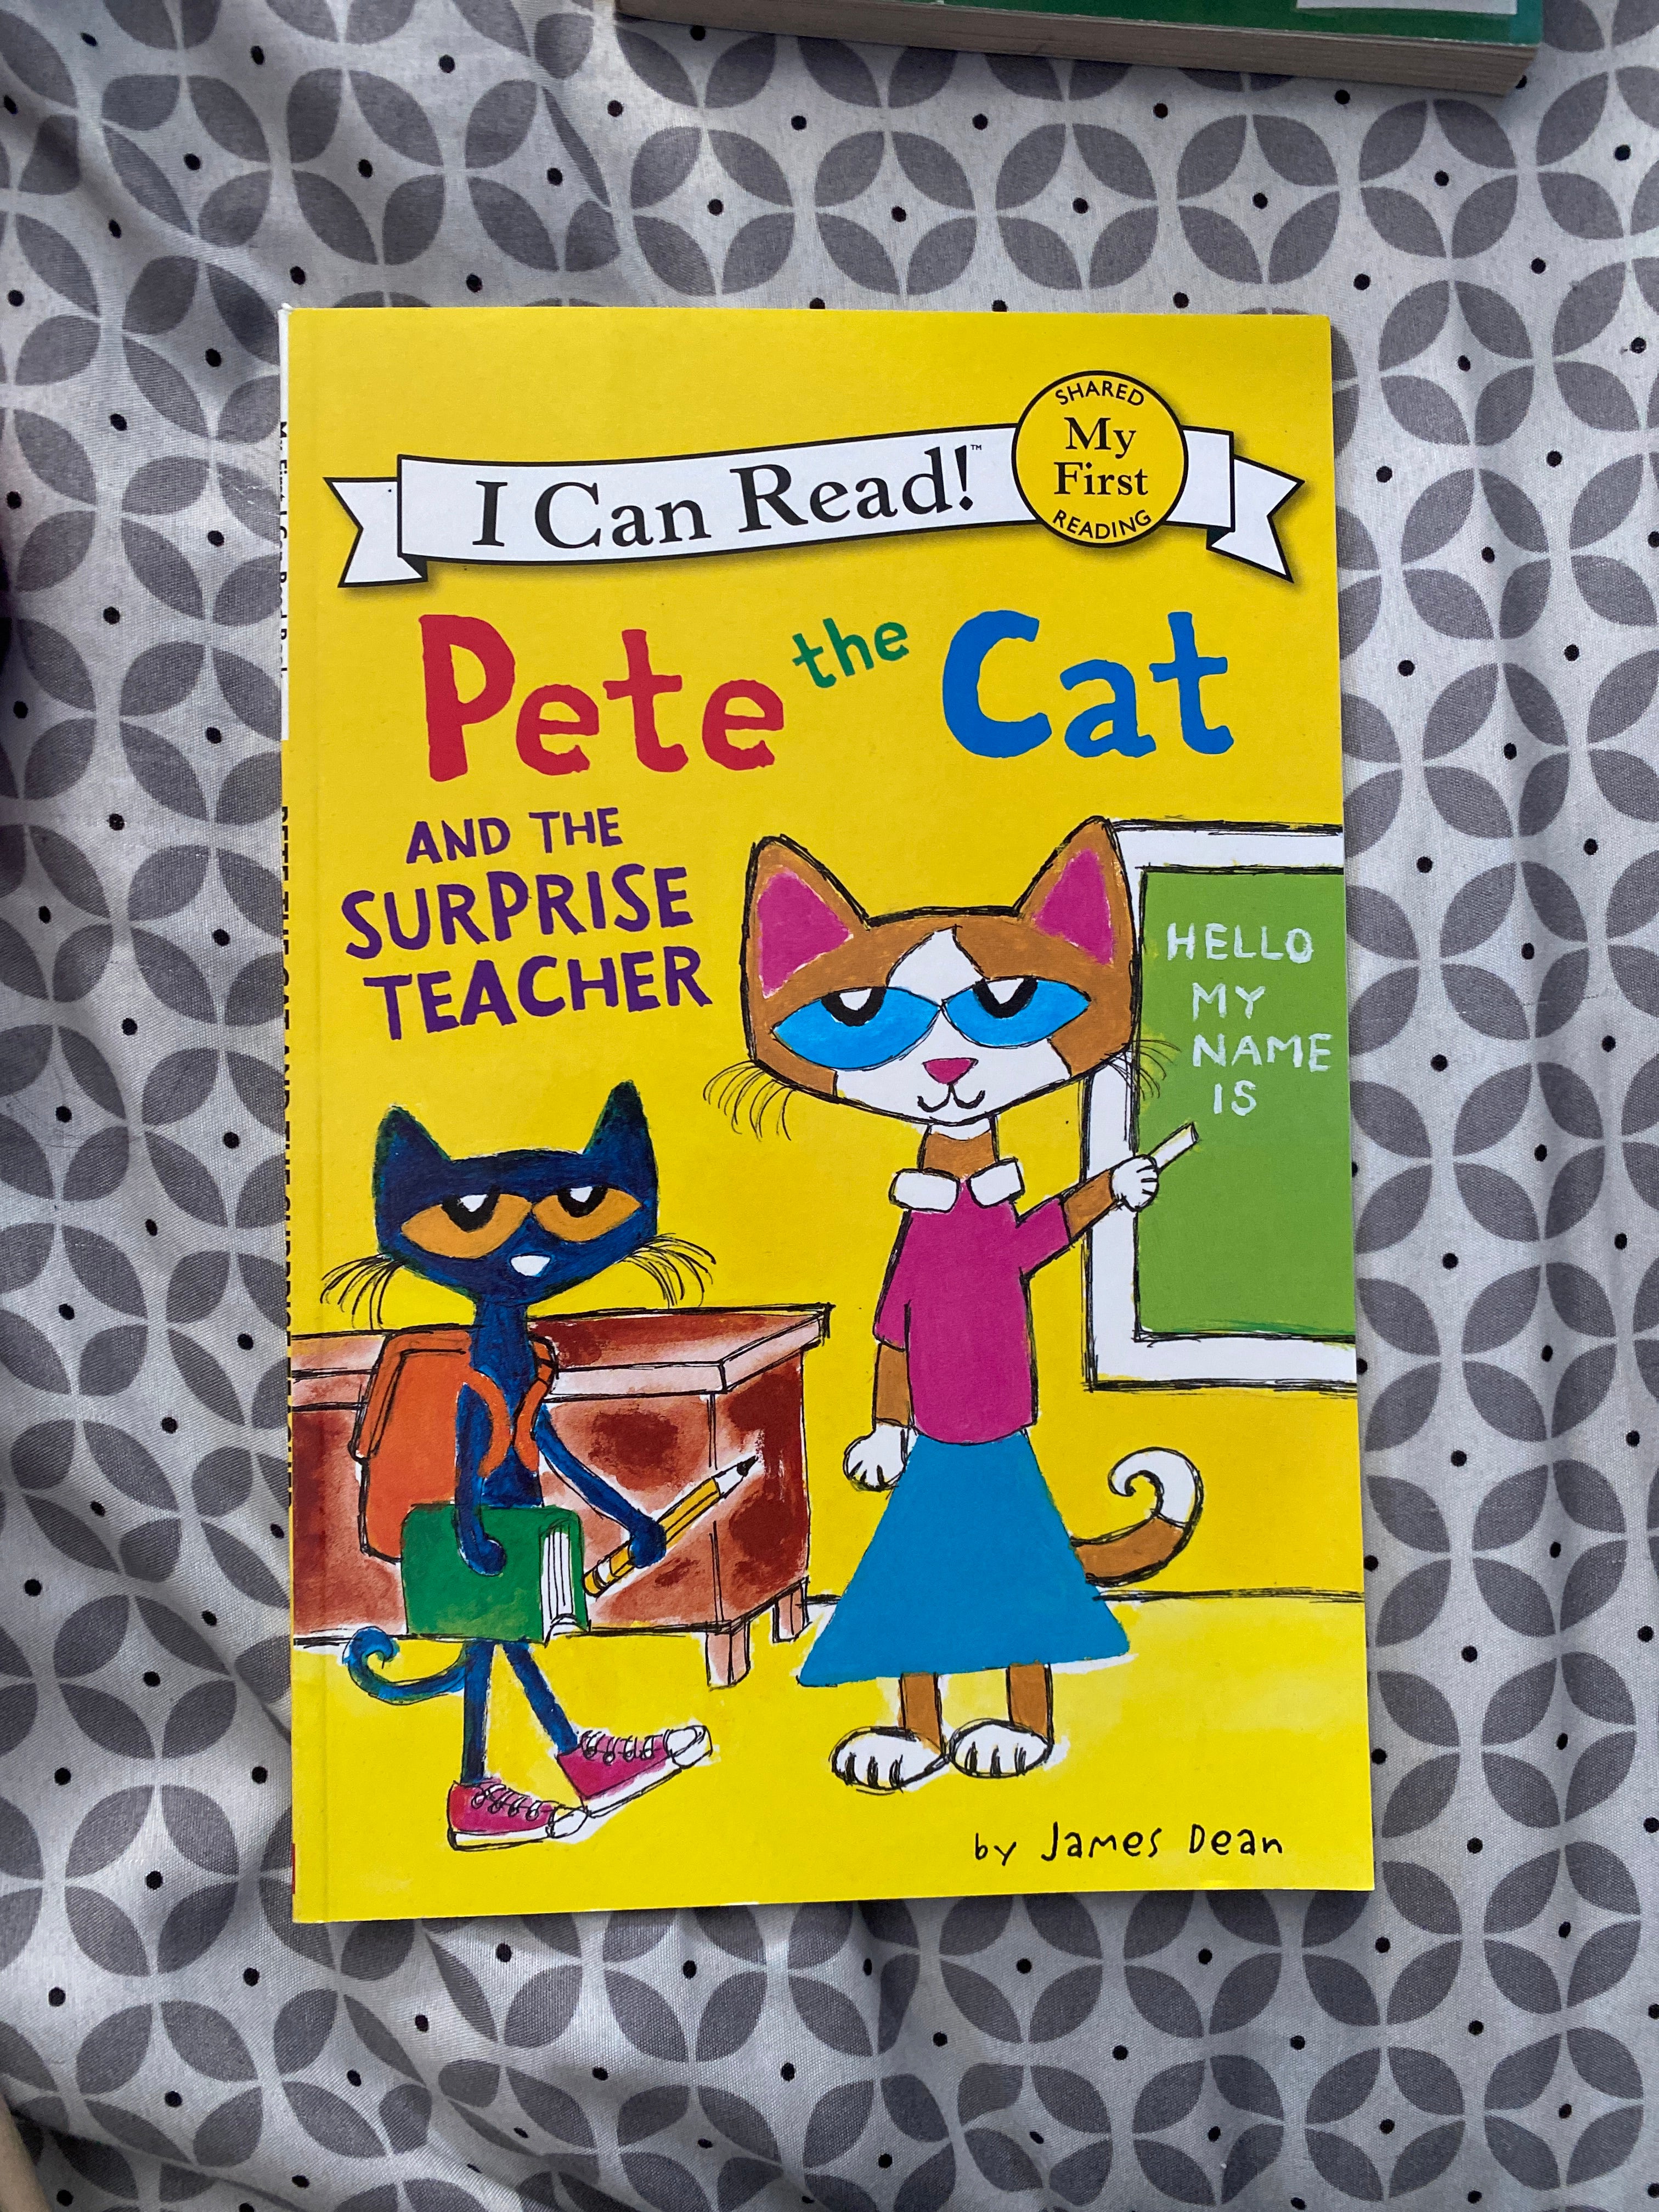 Paperback　the　by　Dean,　and　Pangobooks　teacher　car　surprise　the　Pete　James